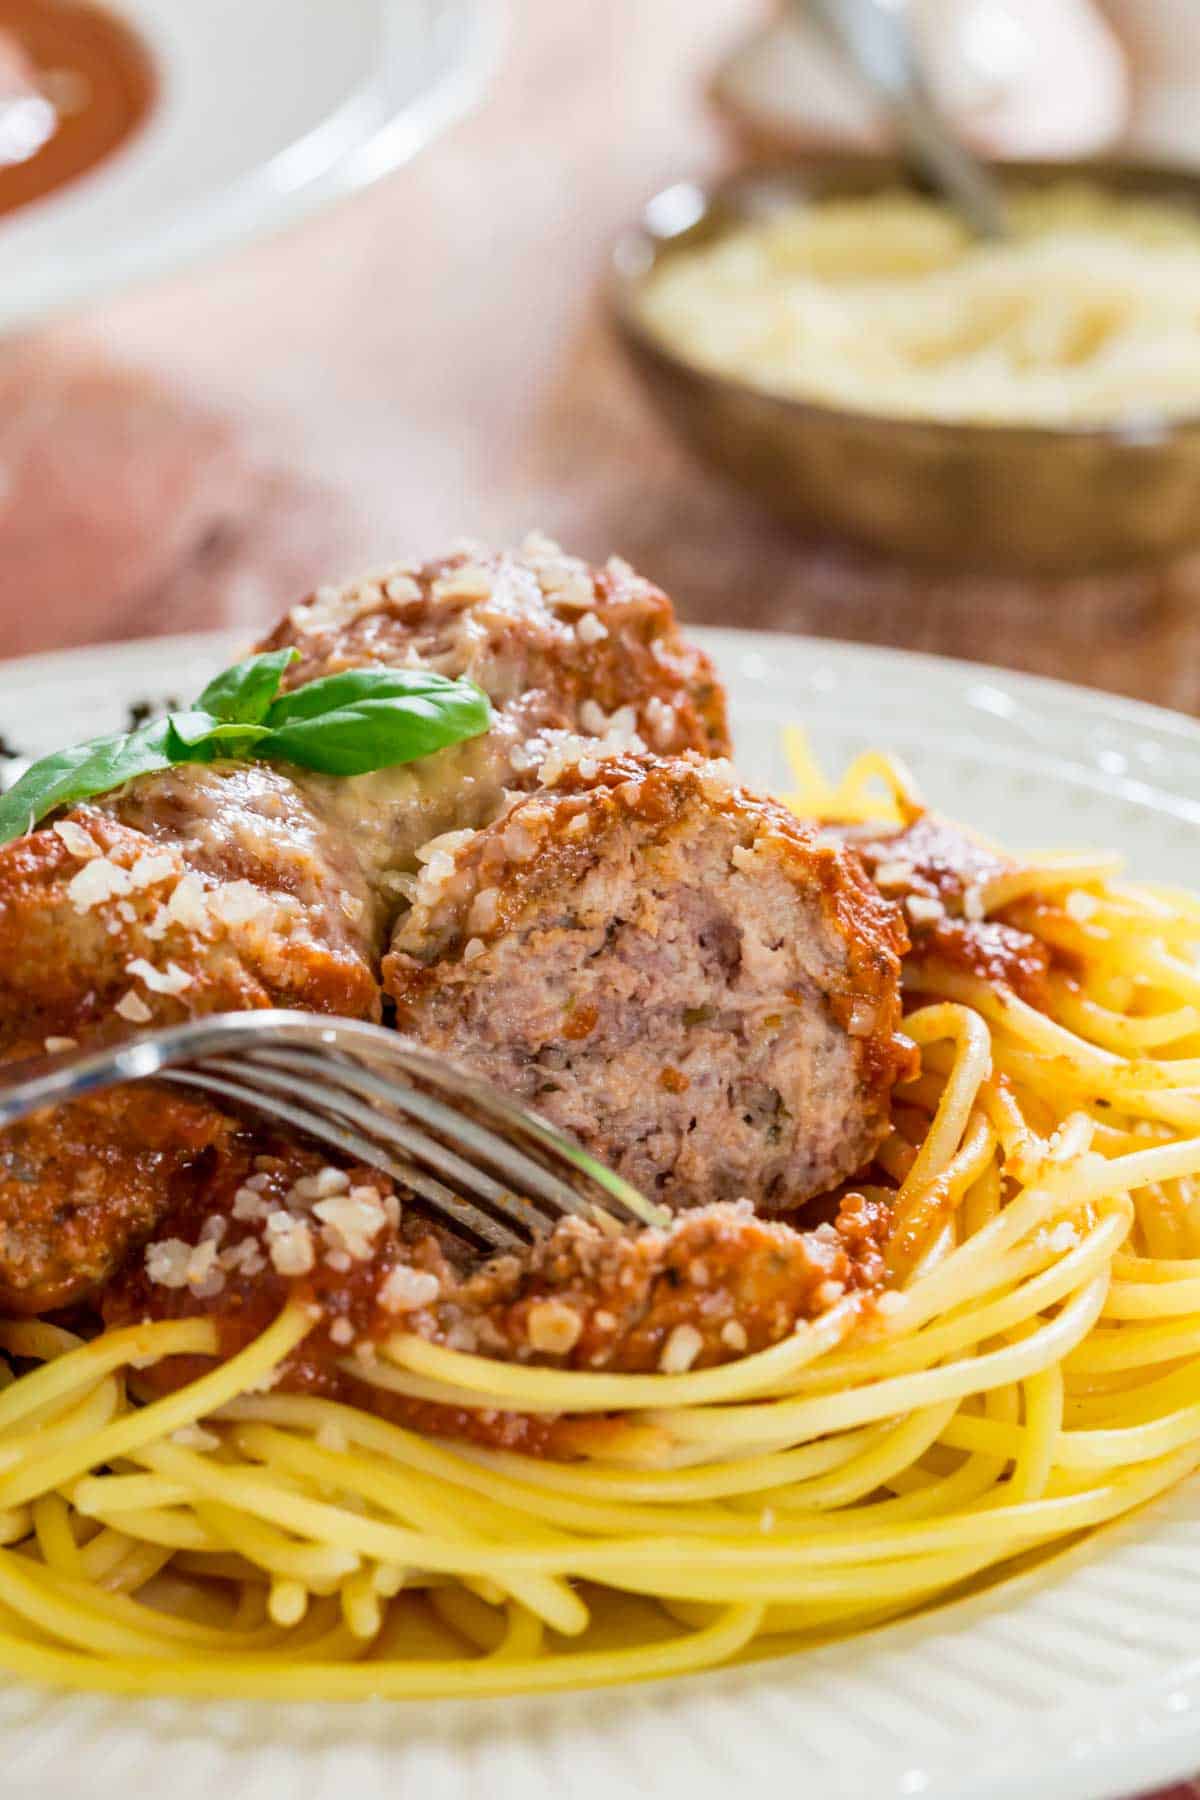 A fork cuts into an Italian meatball on top of a plate of spaghetti.